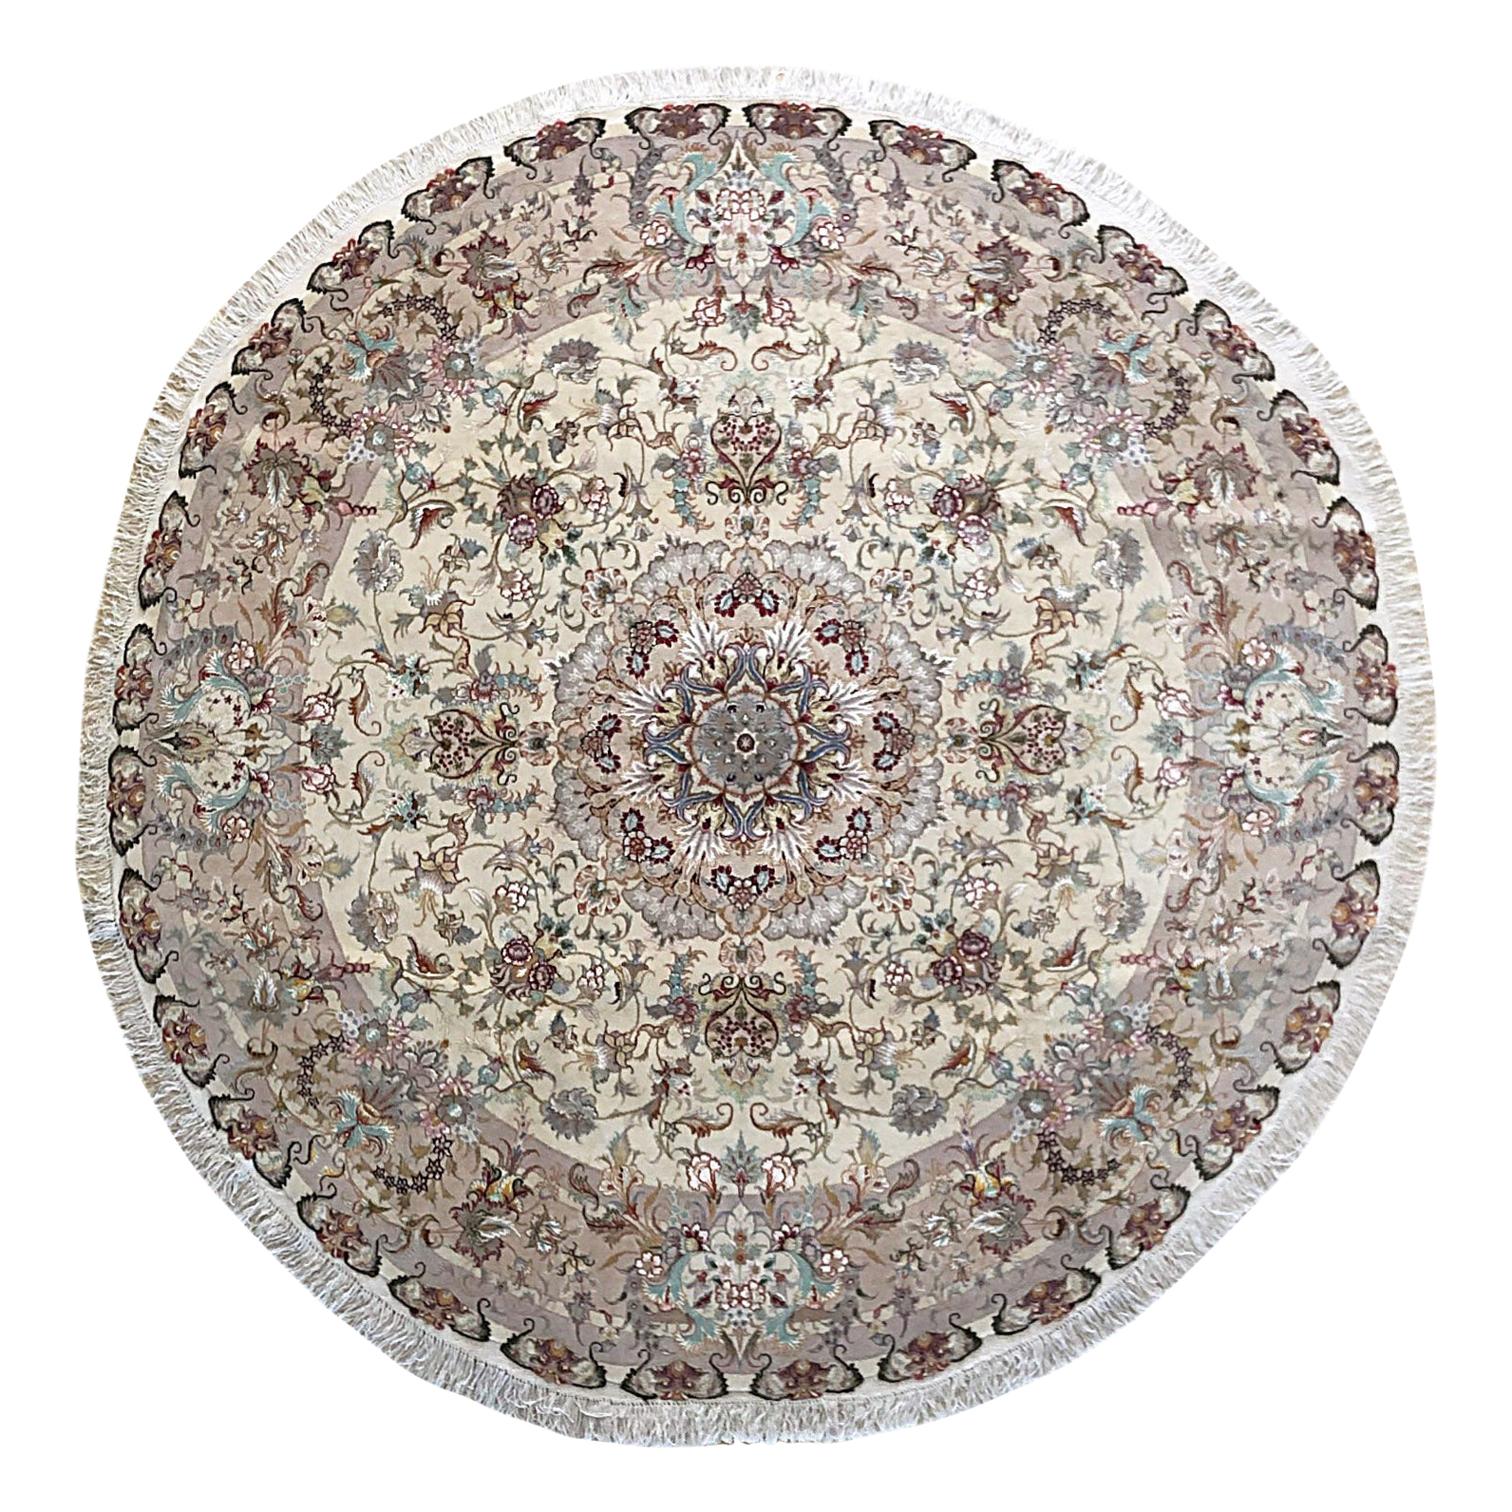 Authentic Persian Hand Knotted Medallion Floral Tabriz Round Rug